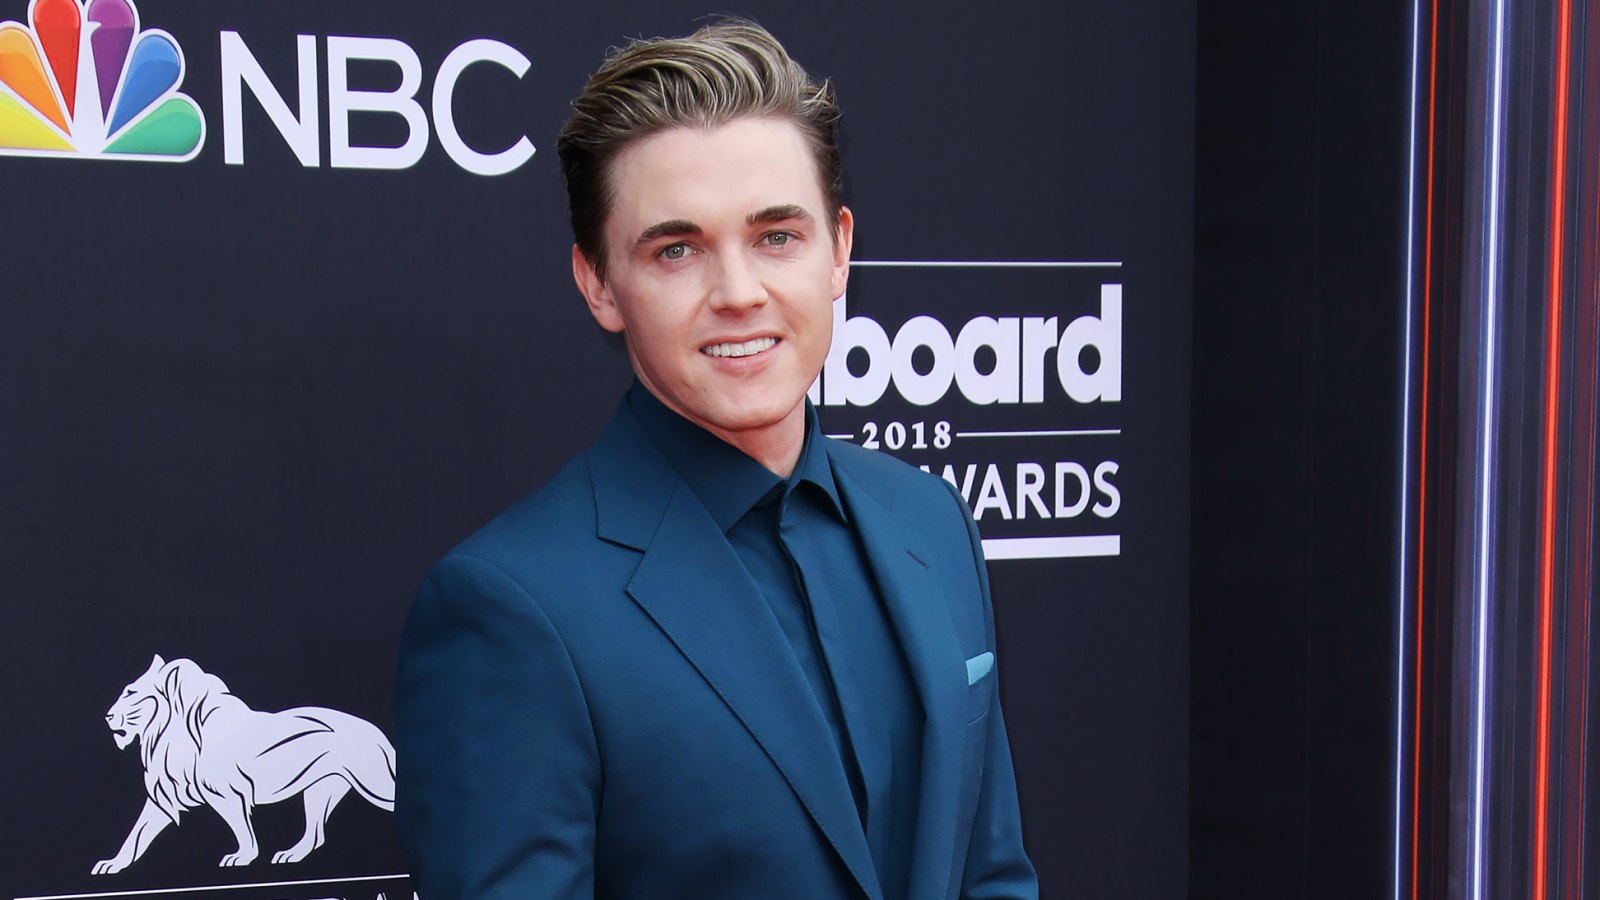 Jesse McCartney 25 Things You Don’t Know About Me